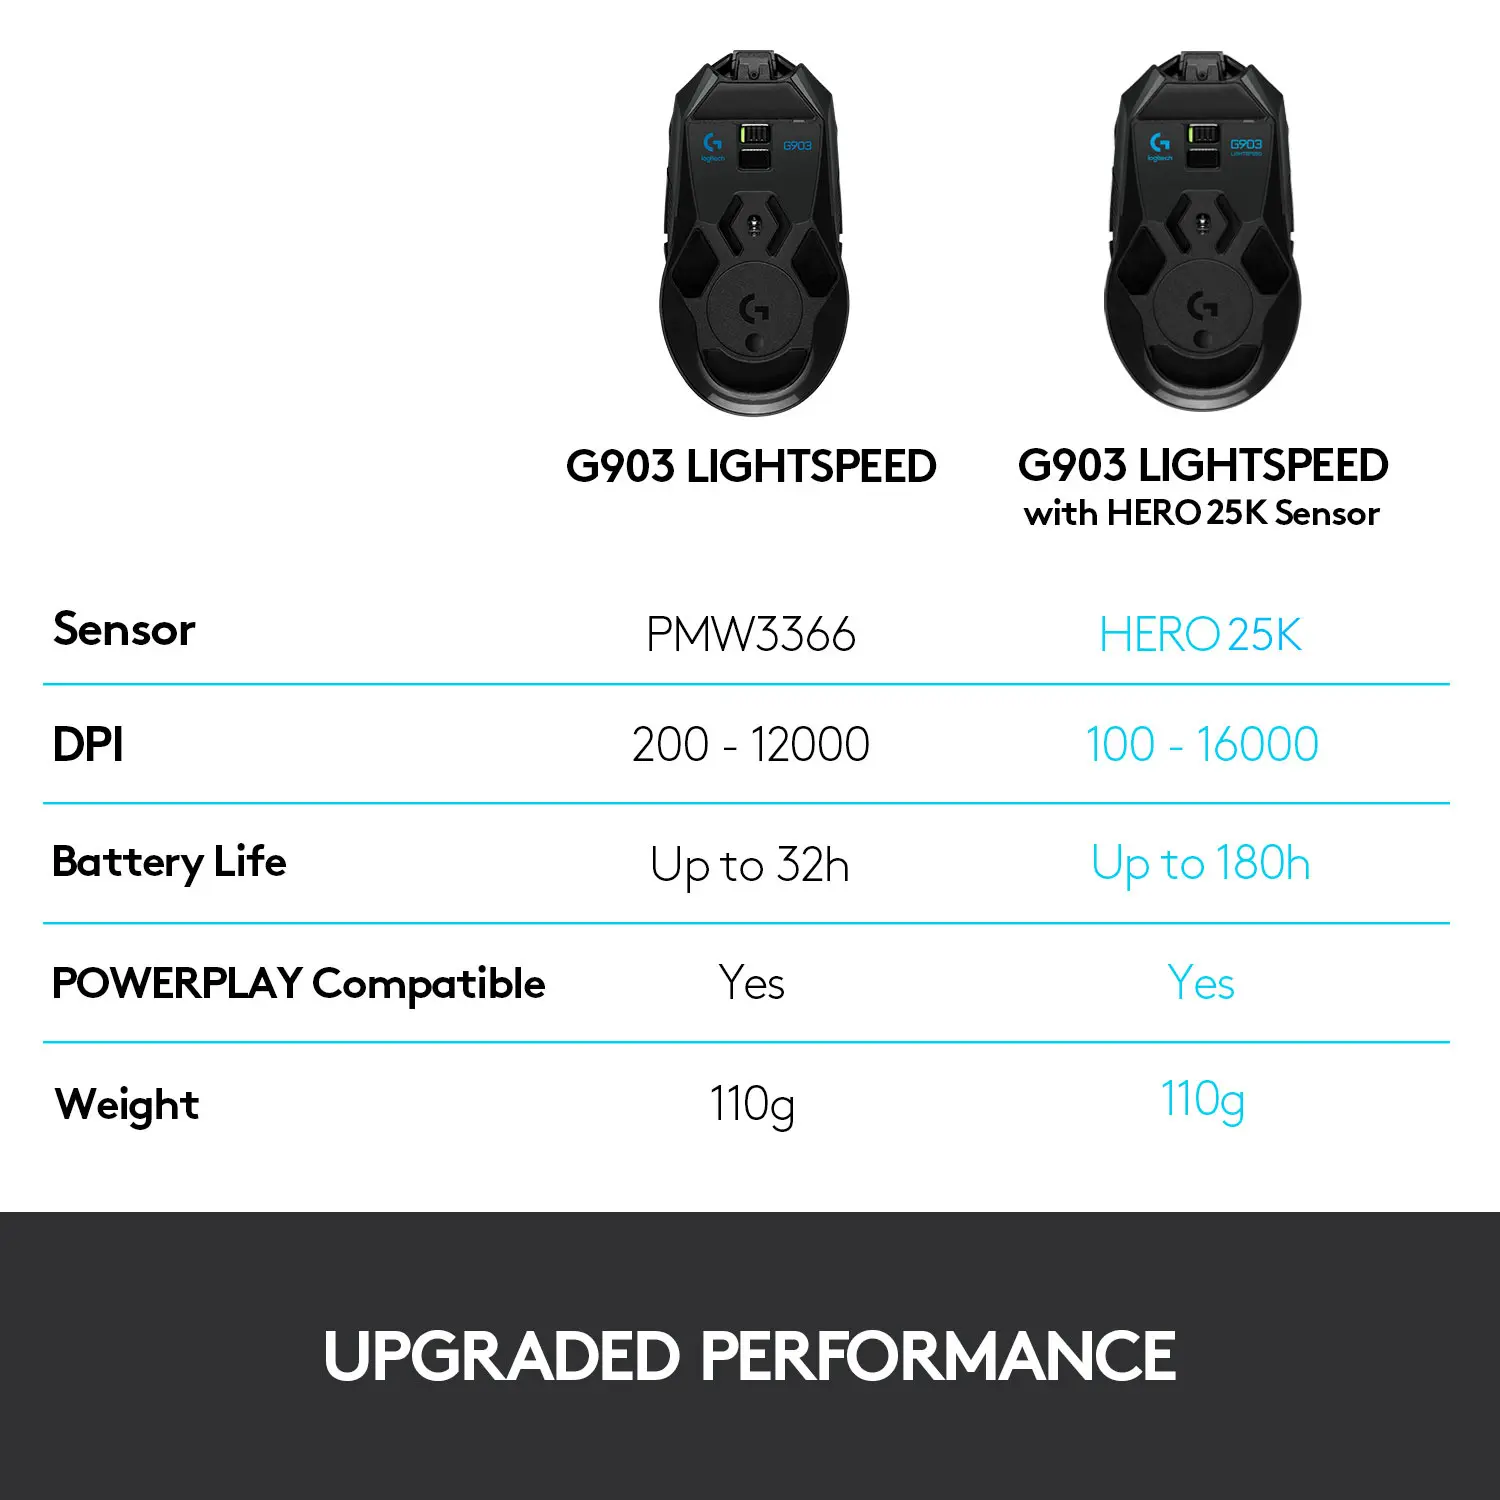 https://www.evetech.co.za/repository/ProductImagesV1/logitech-g903-wireless-gaming-mouse-1500px-v1-0007.webp